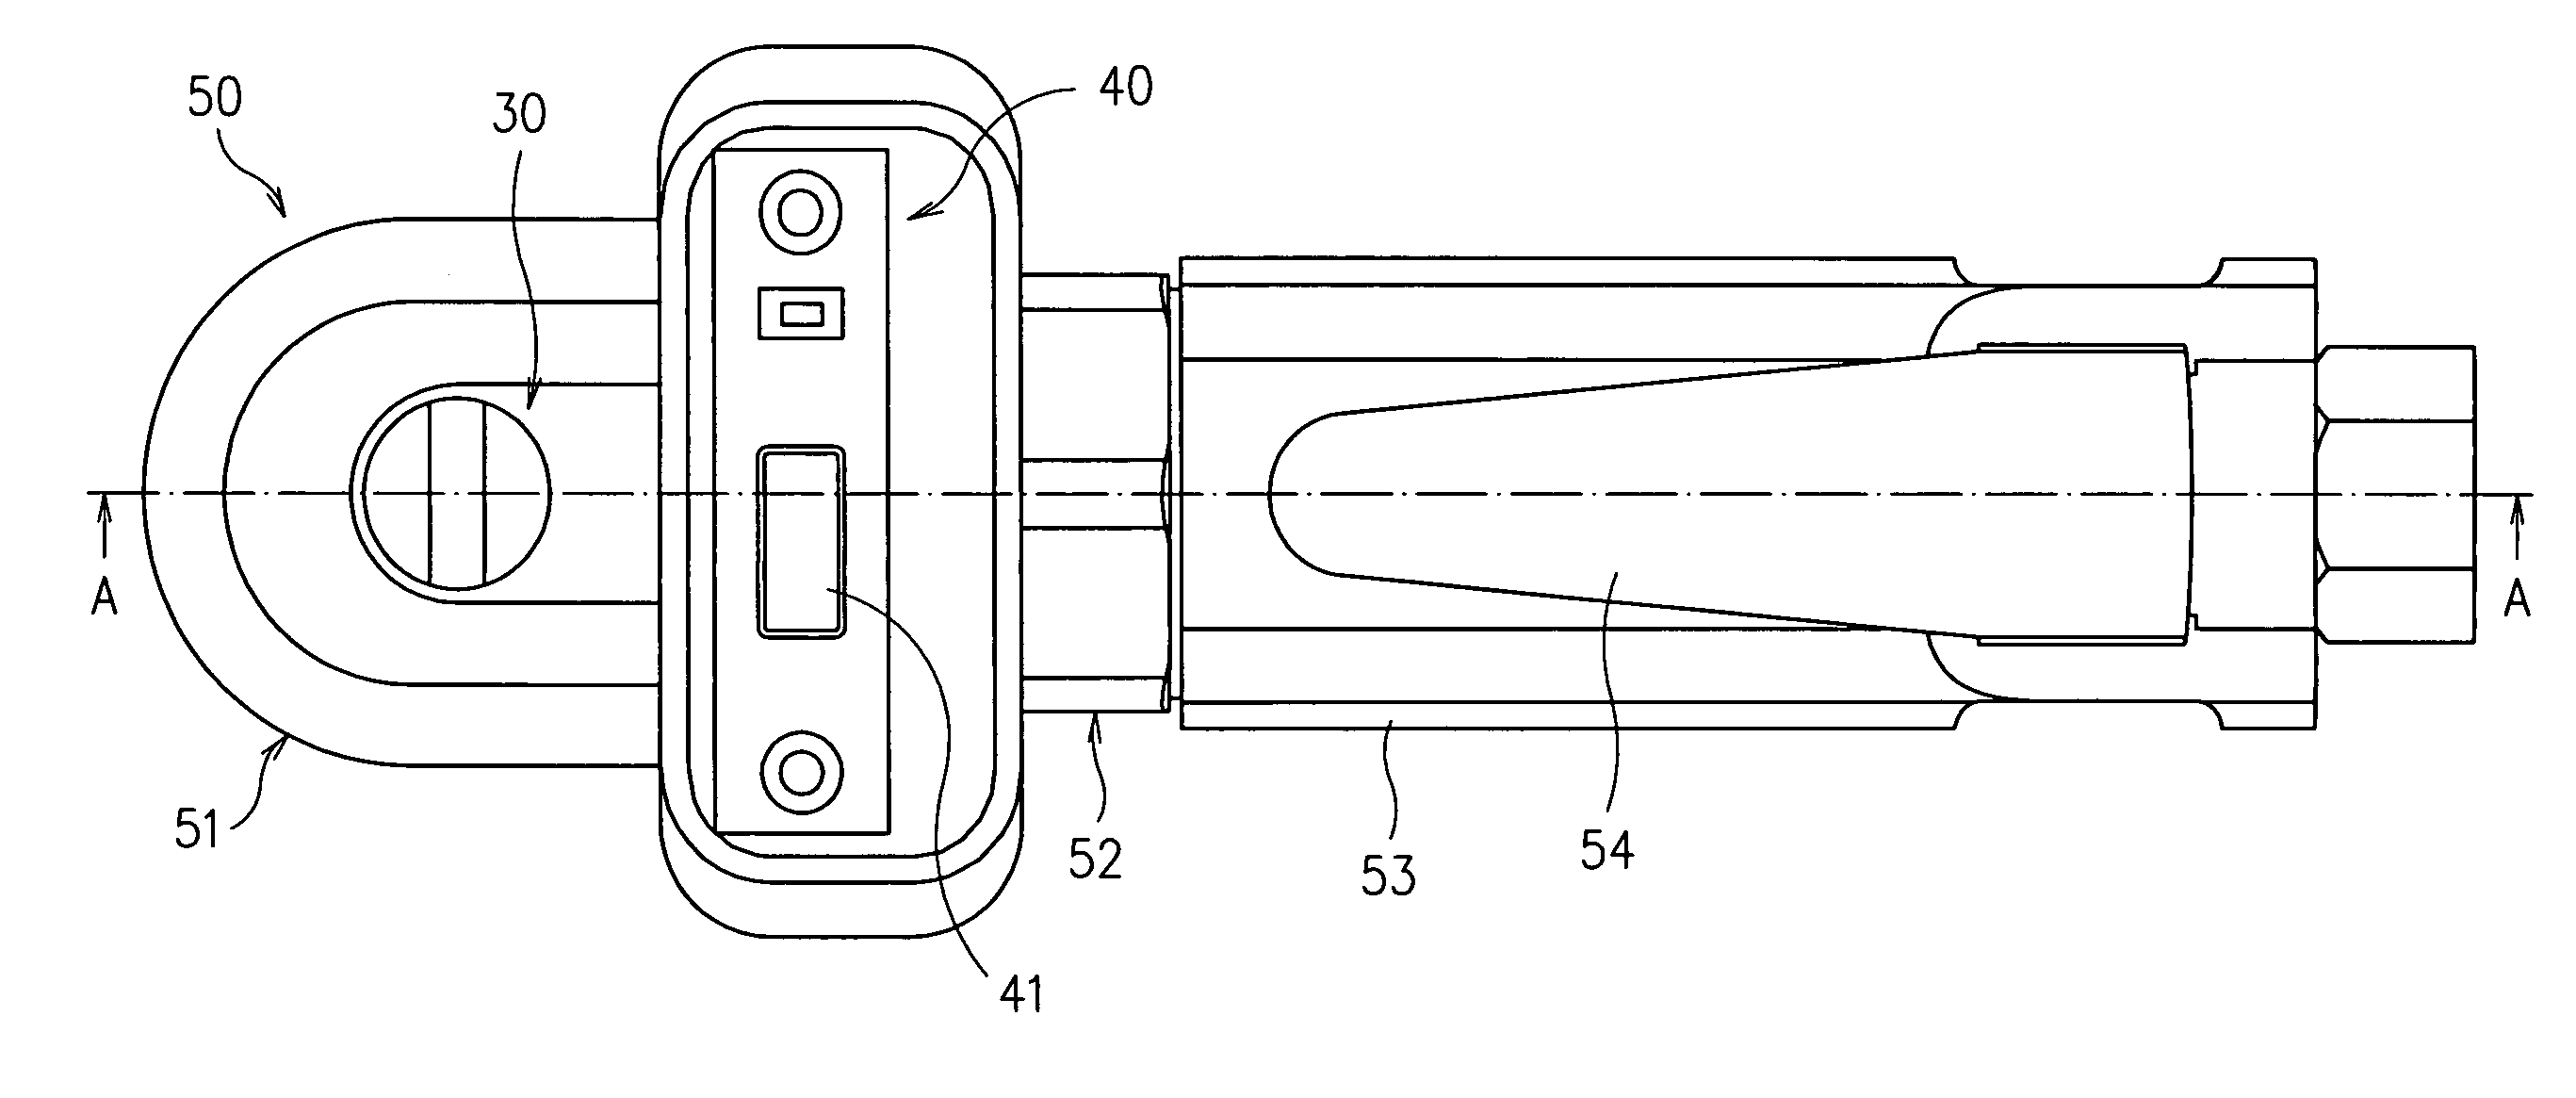 Digital power torque wrench of indirect transmission